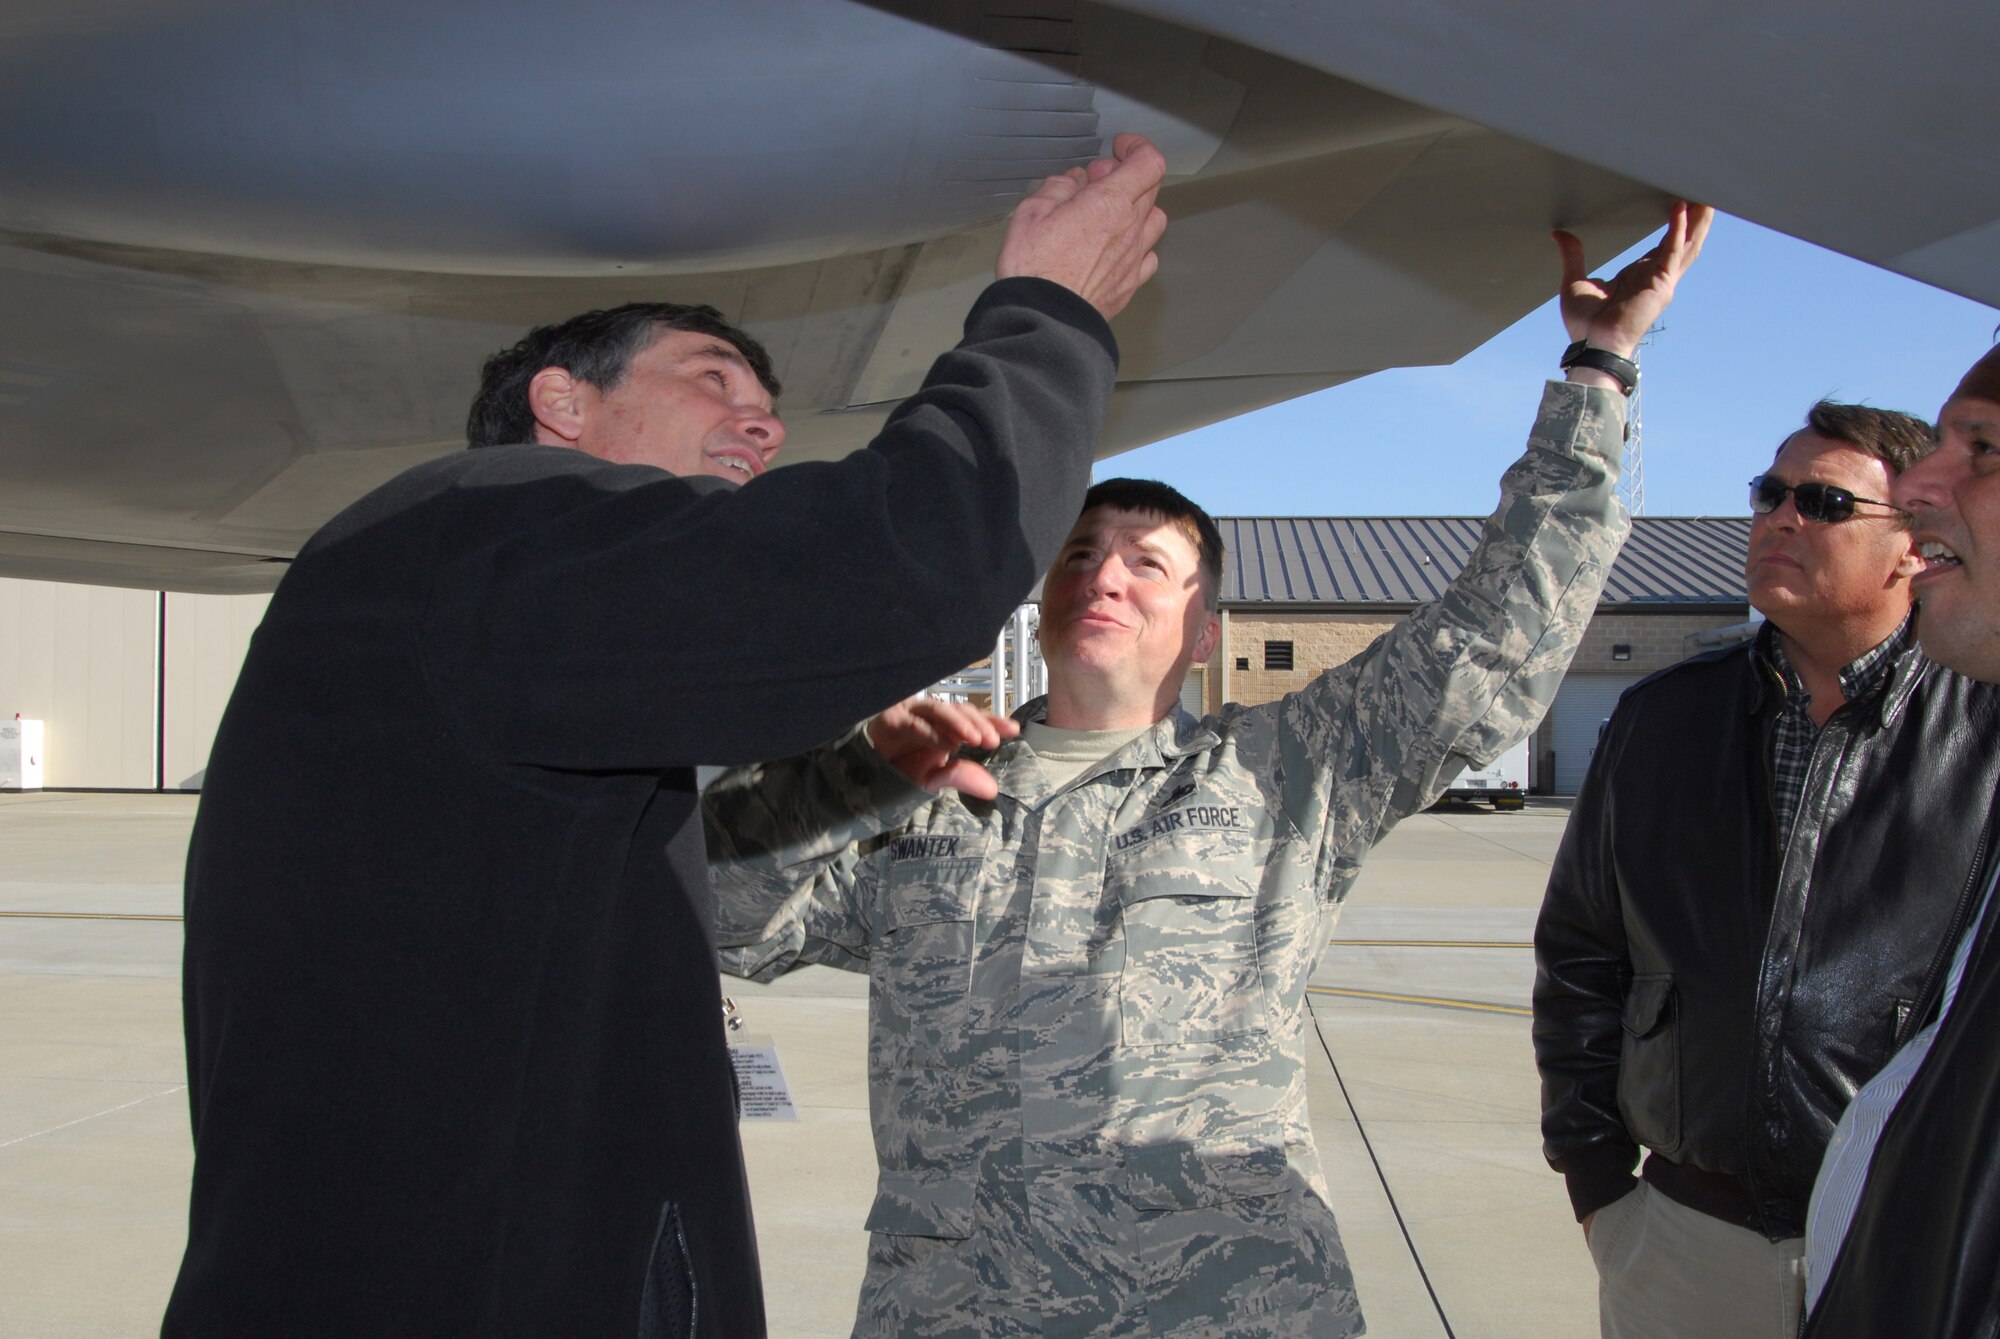 Above, An Airman from the 43rd Fighter Squadron, Tyndall Air Force Base, Fla., gives Henry Lowe (left), Lowe Aviation president, a closer look at  the underbelly of an F-22 Raptor, while Lee Minor, Appraisal Service, looks on. U. S. Air Force courtesy photo